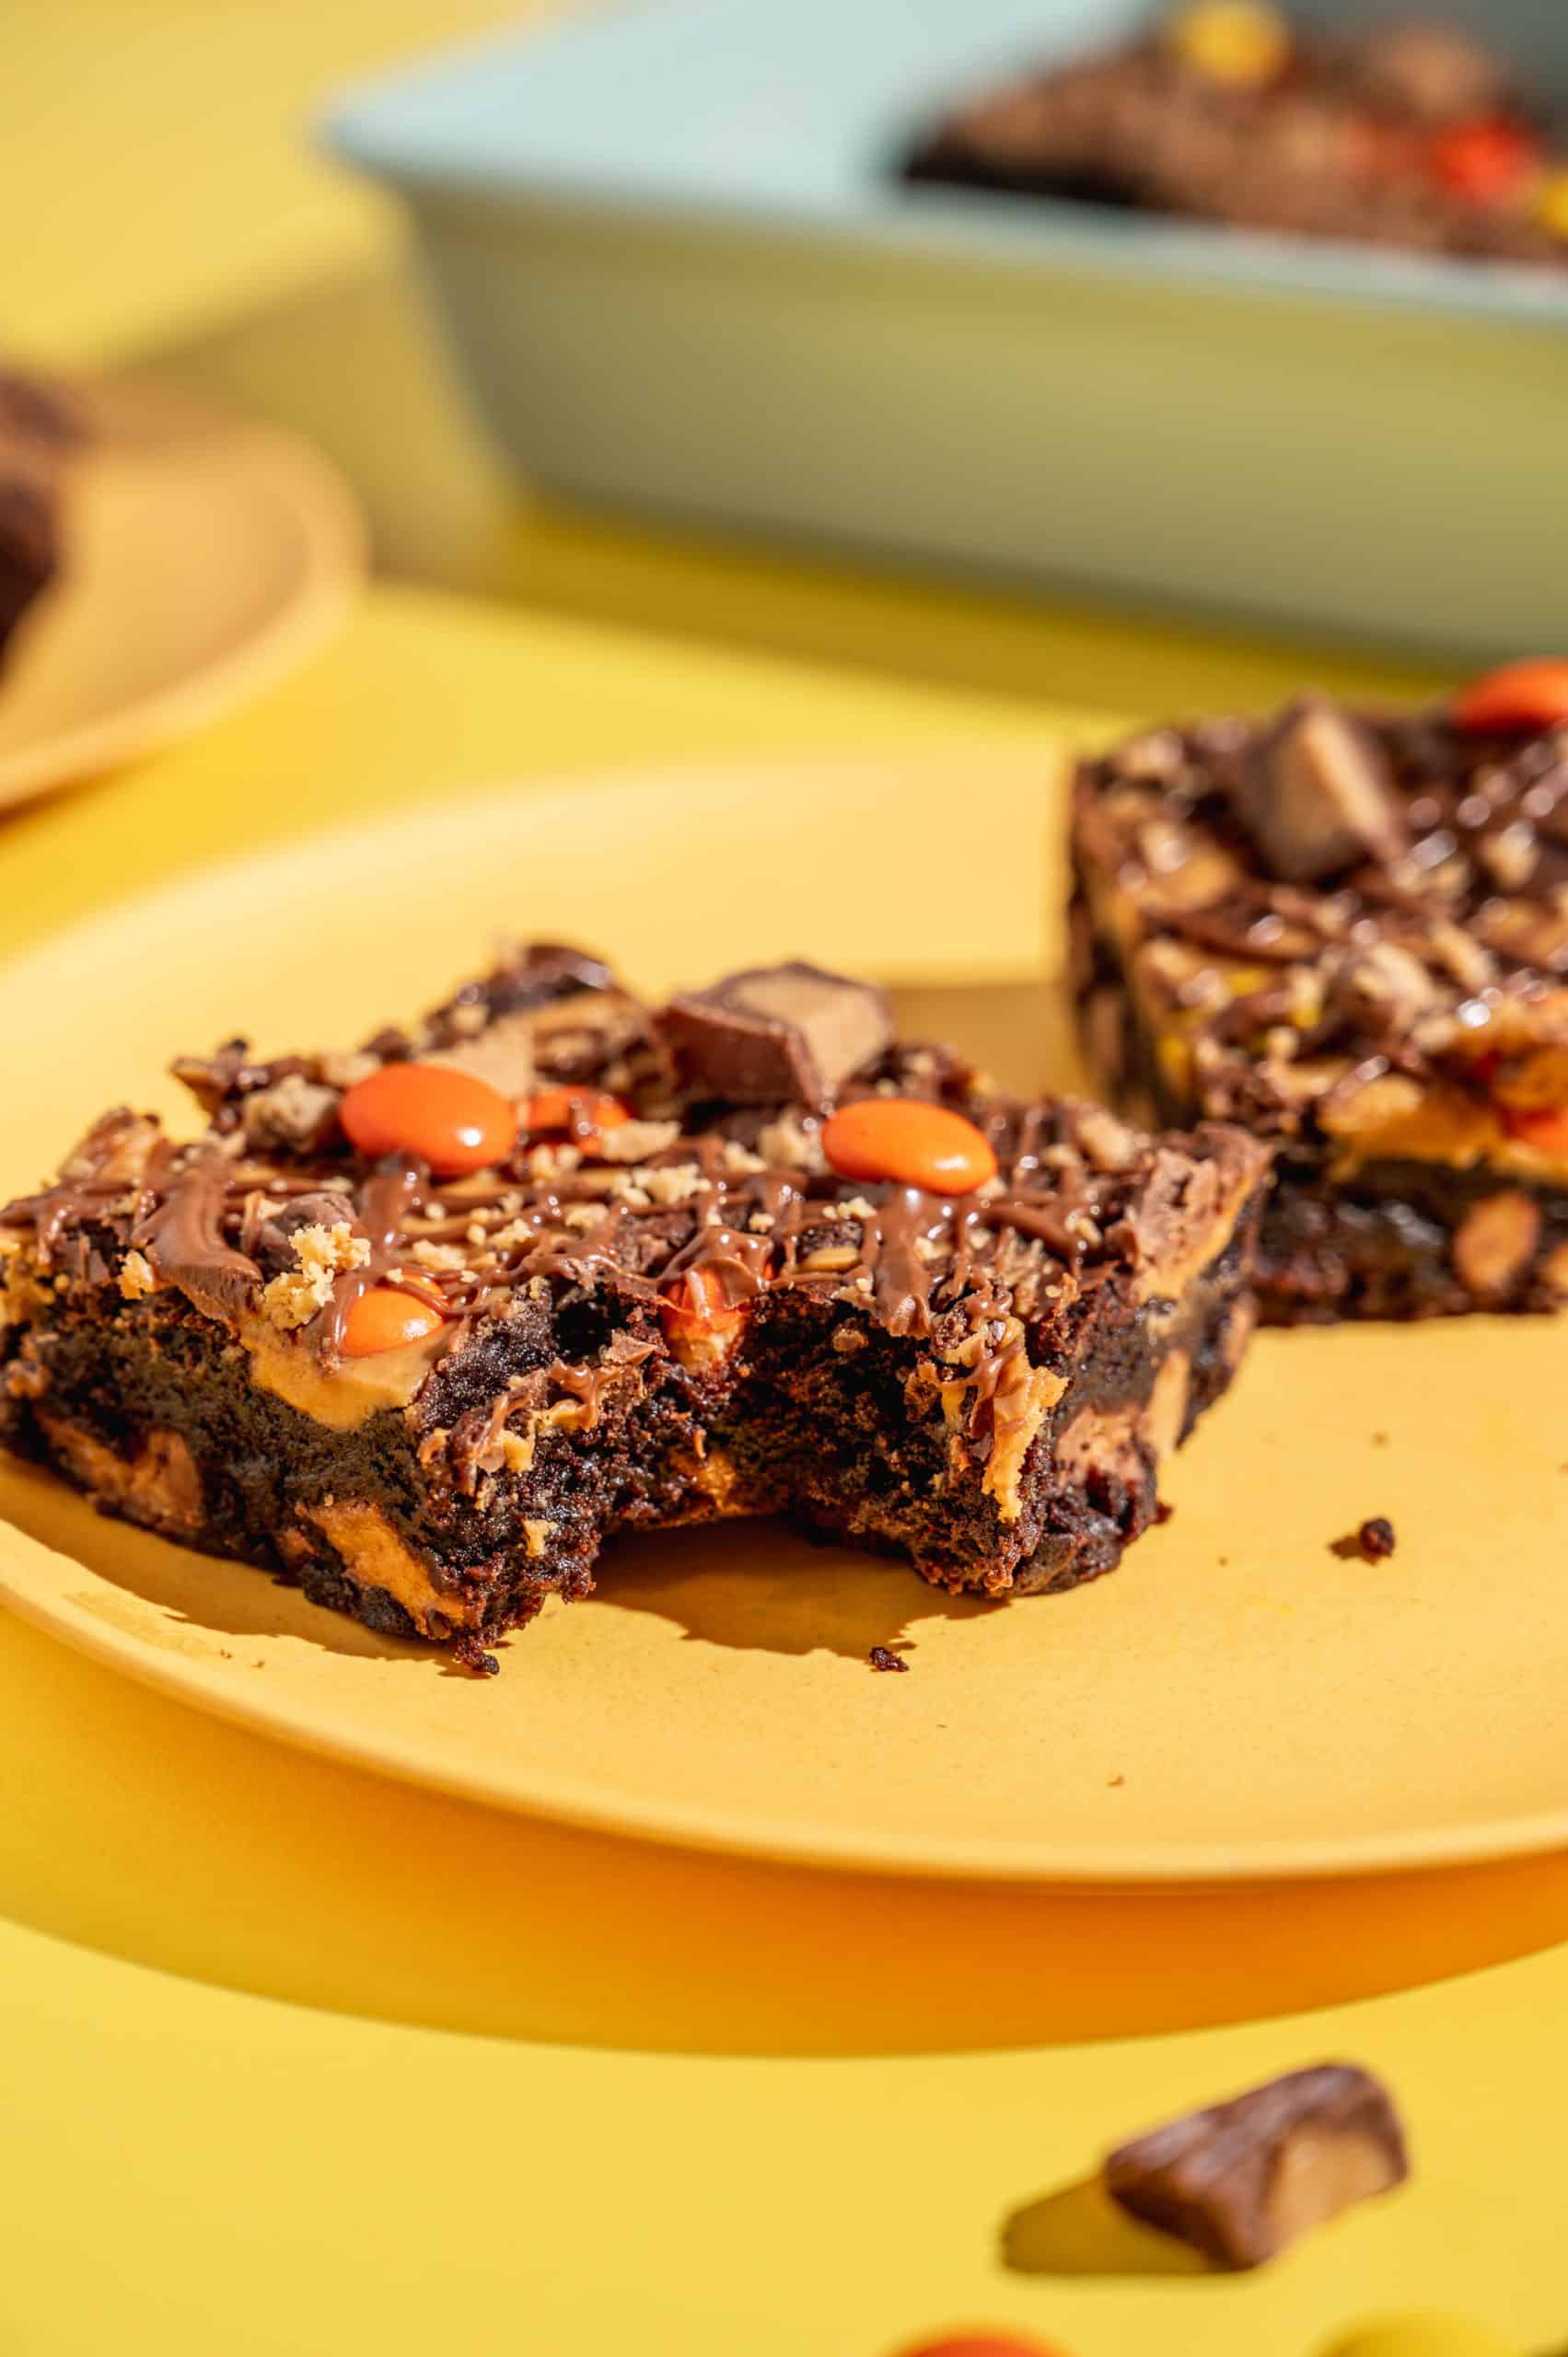 Close-up of a Reese's brownie with a bite taken out on a yellow plate showing fudgy interior.